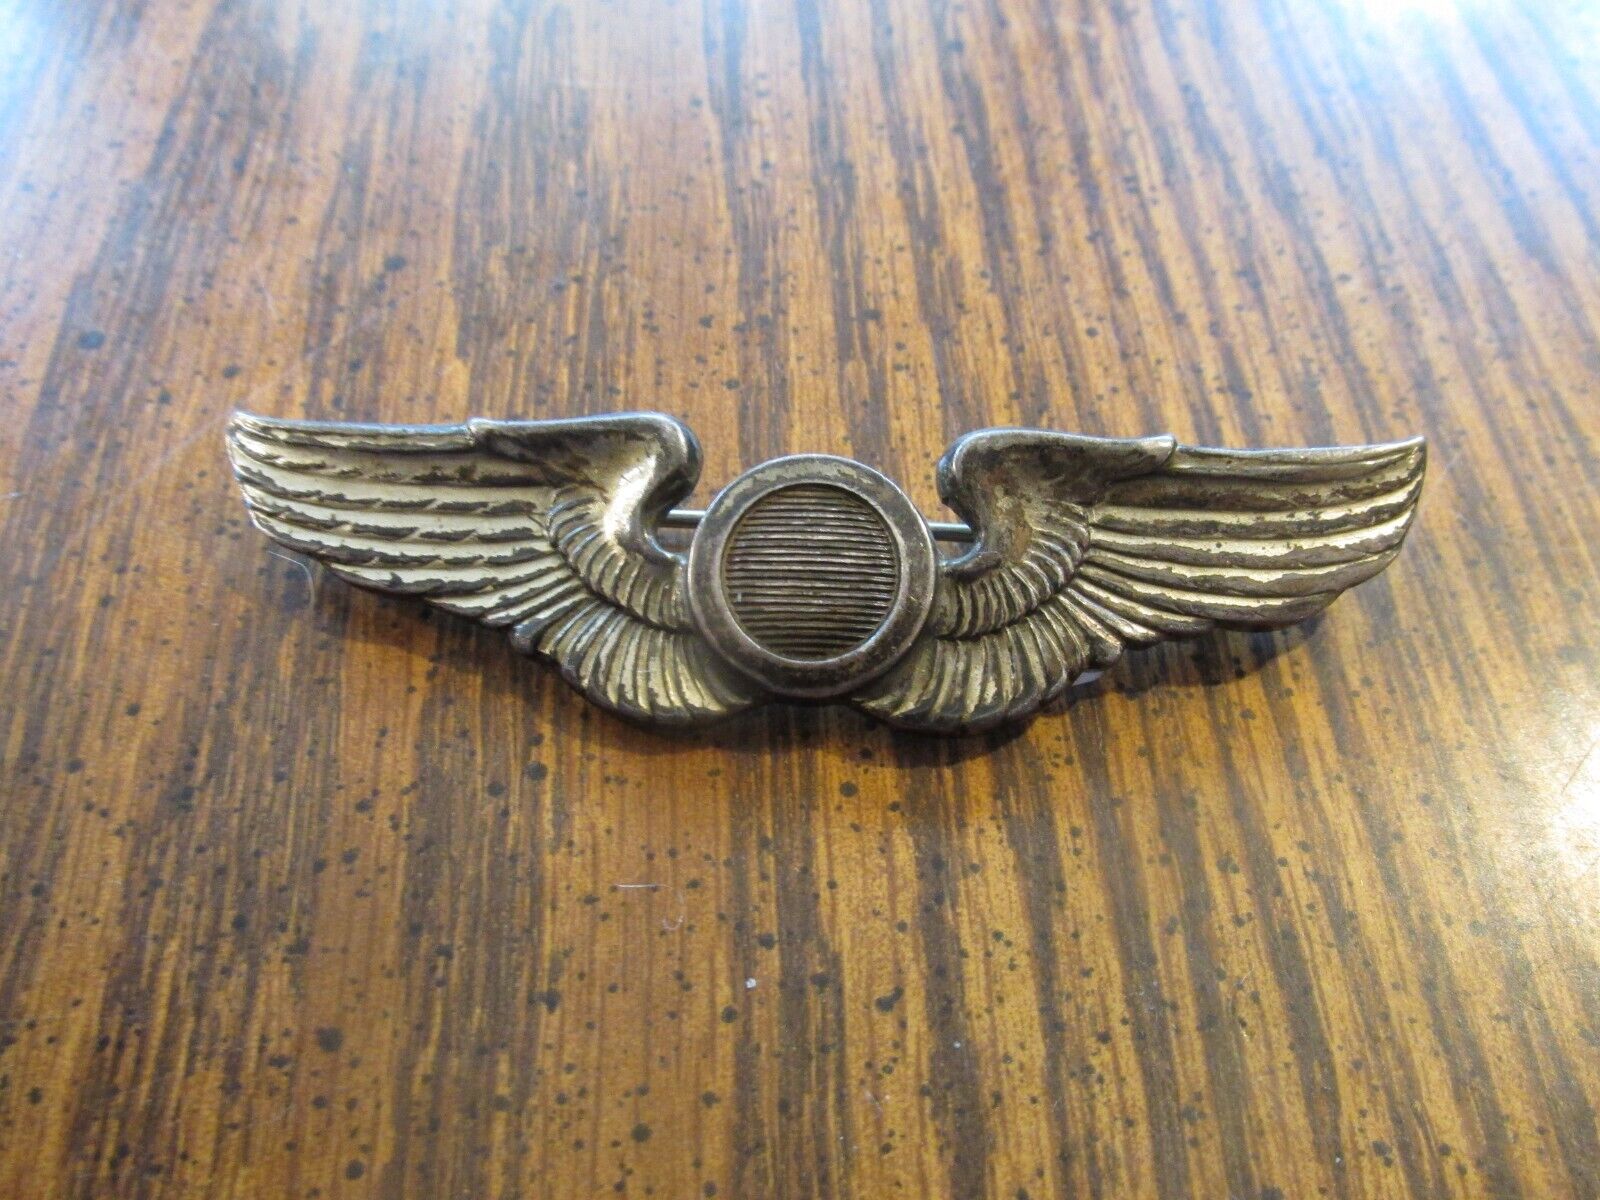 ww 2 AAF OBSERVER wing full size 3 inch Pin back